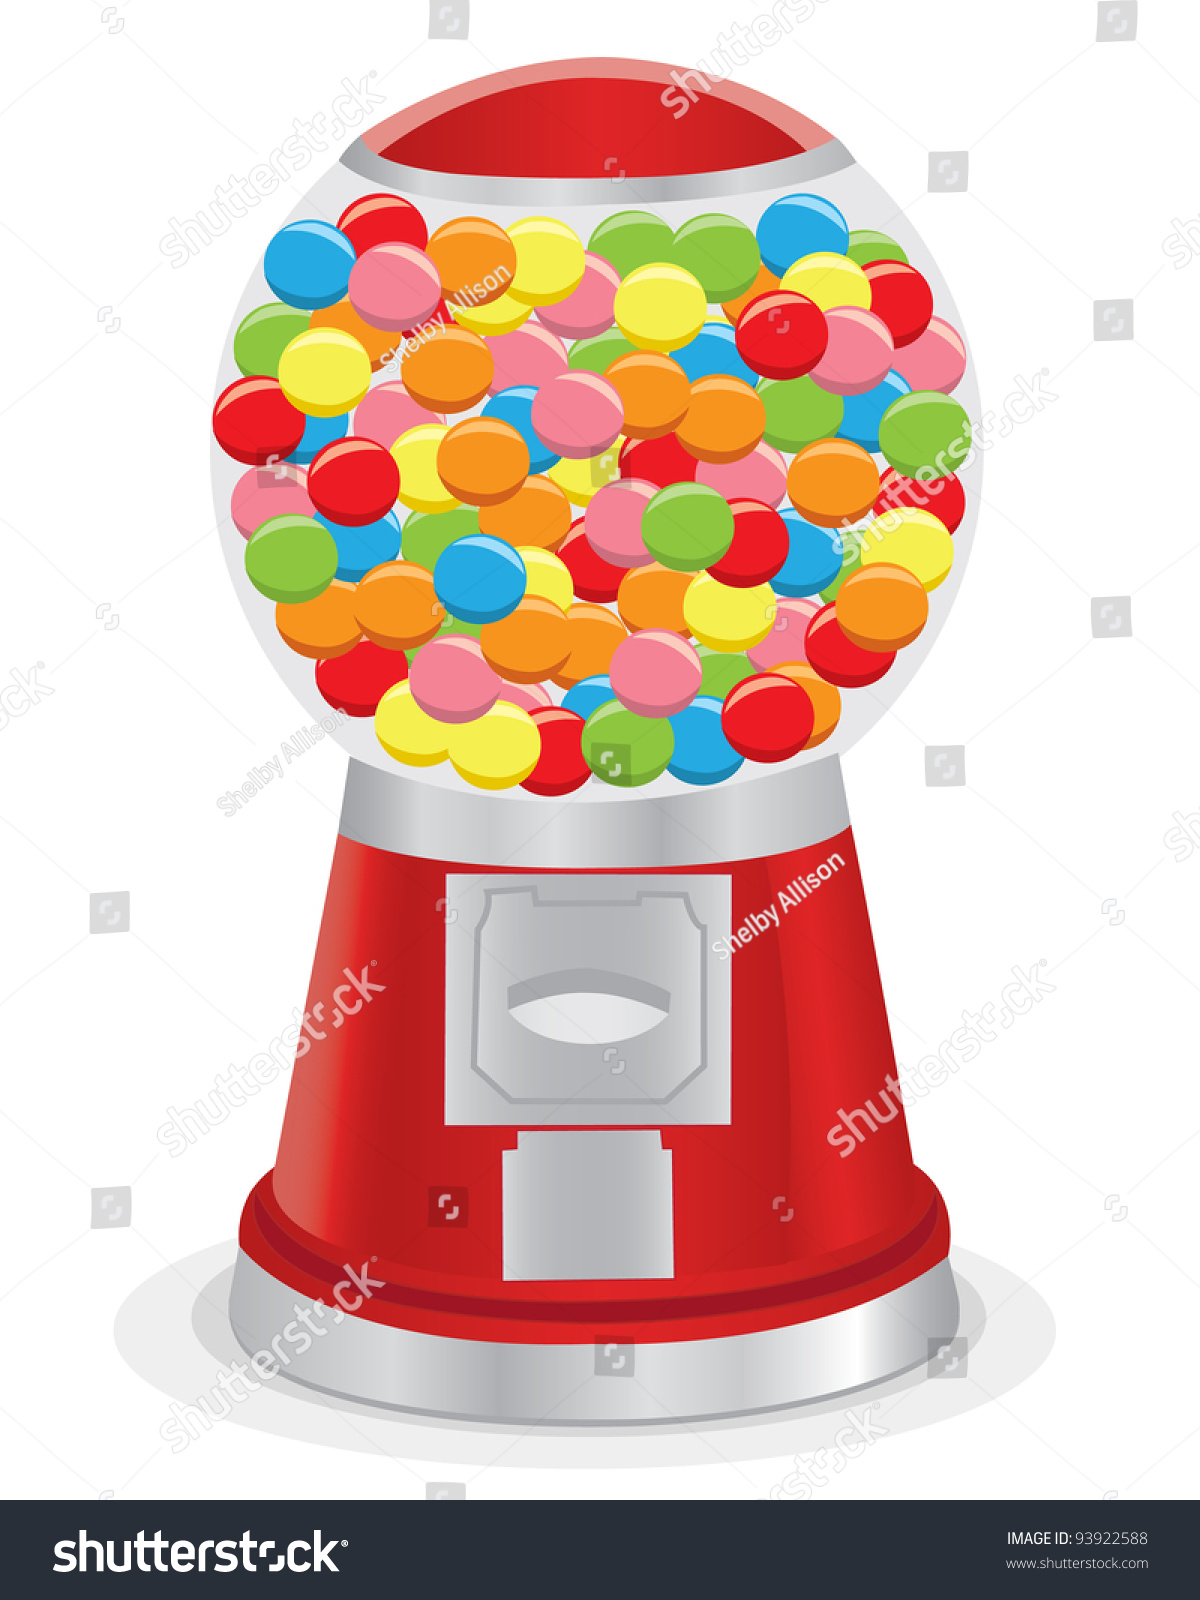 Vector Illustration Isolated Red Gumball Machine Stock Vector 93922588 ...